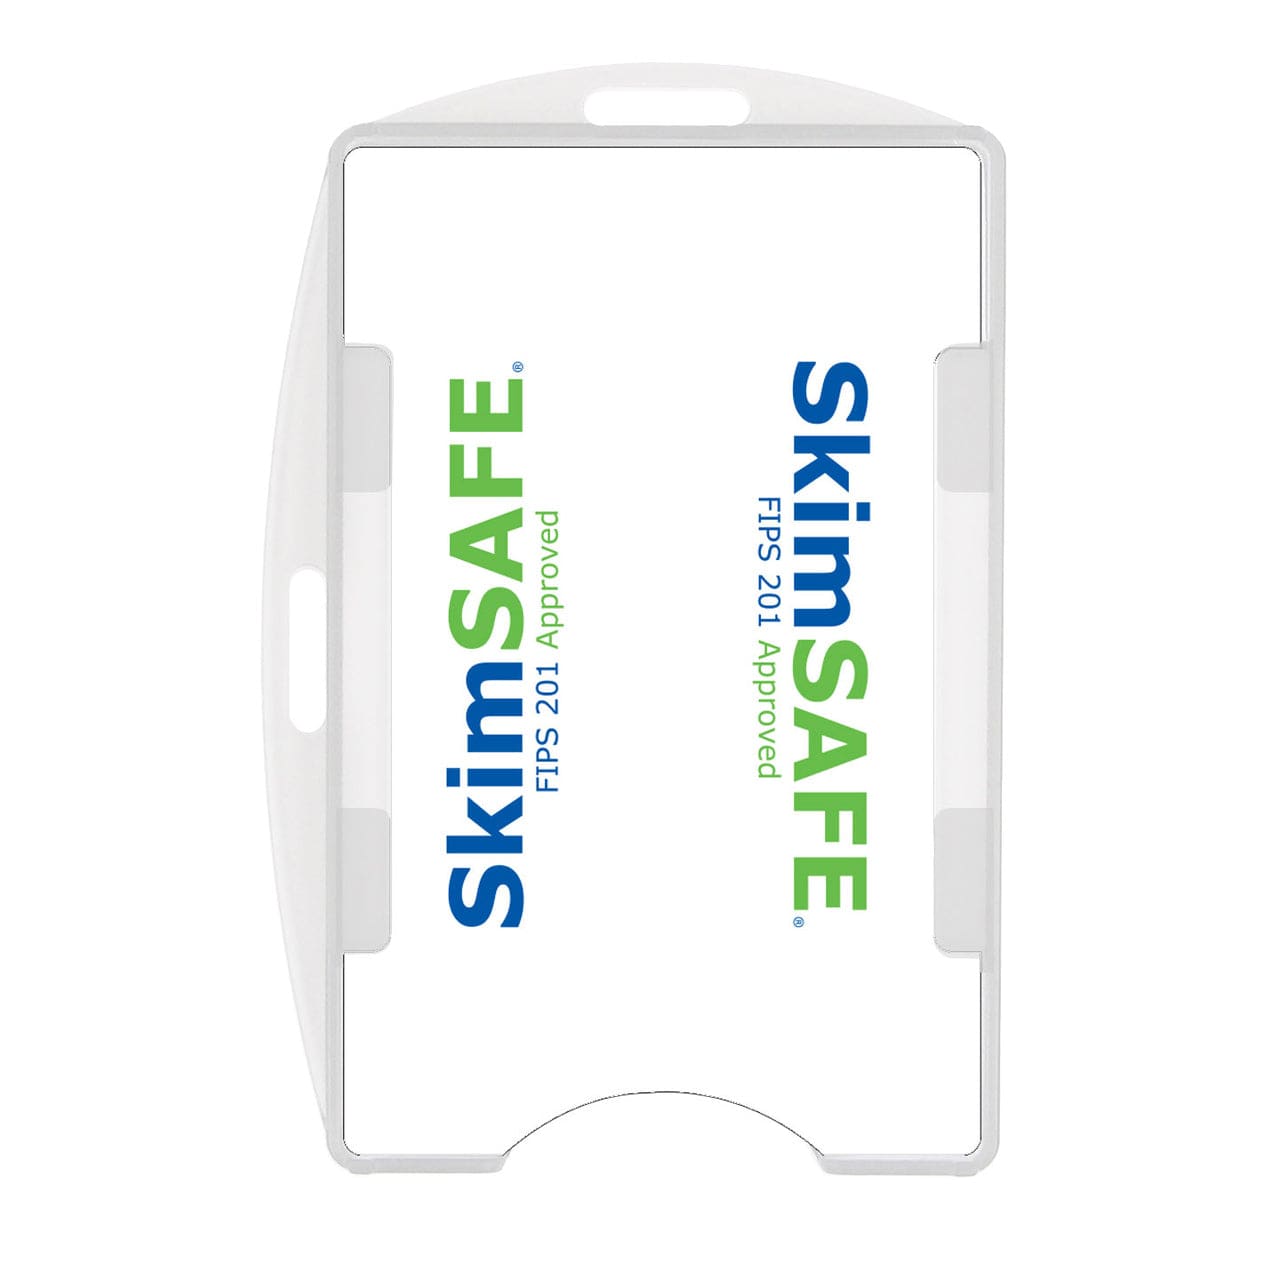 A white SkimSAFE FIPS 201 RFID Blocking 2-Card ID Holder (AH-210) with the text "SkimSAFE" and "FIPS 201 Approved" in blue and green. Designed to protect identification cards, this RFID blocking cardholder ensures your information stays secure.